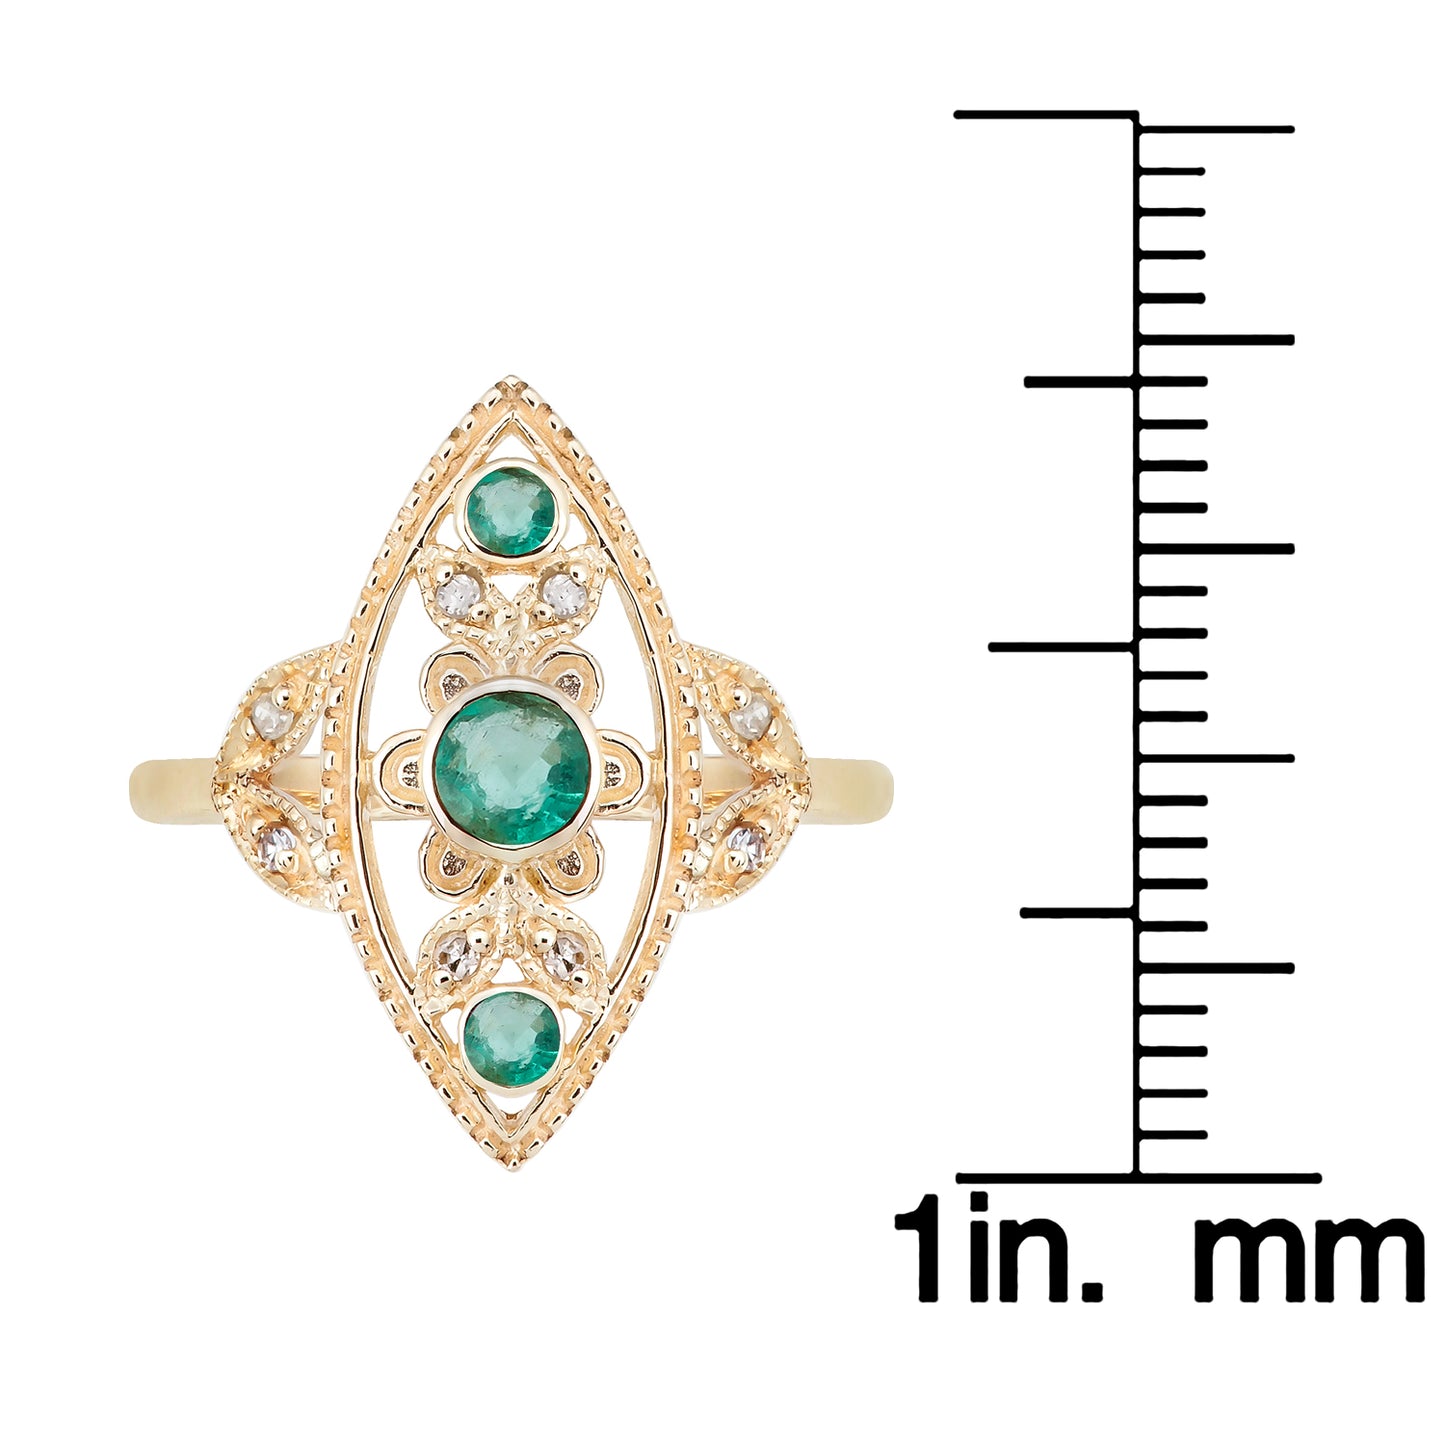 10k Yellow Gold Antique Style Genuine Round Emerald and Diamond Ring